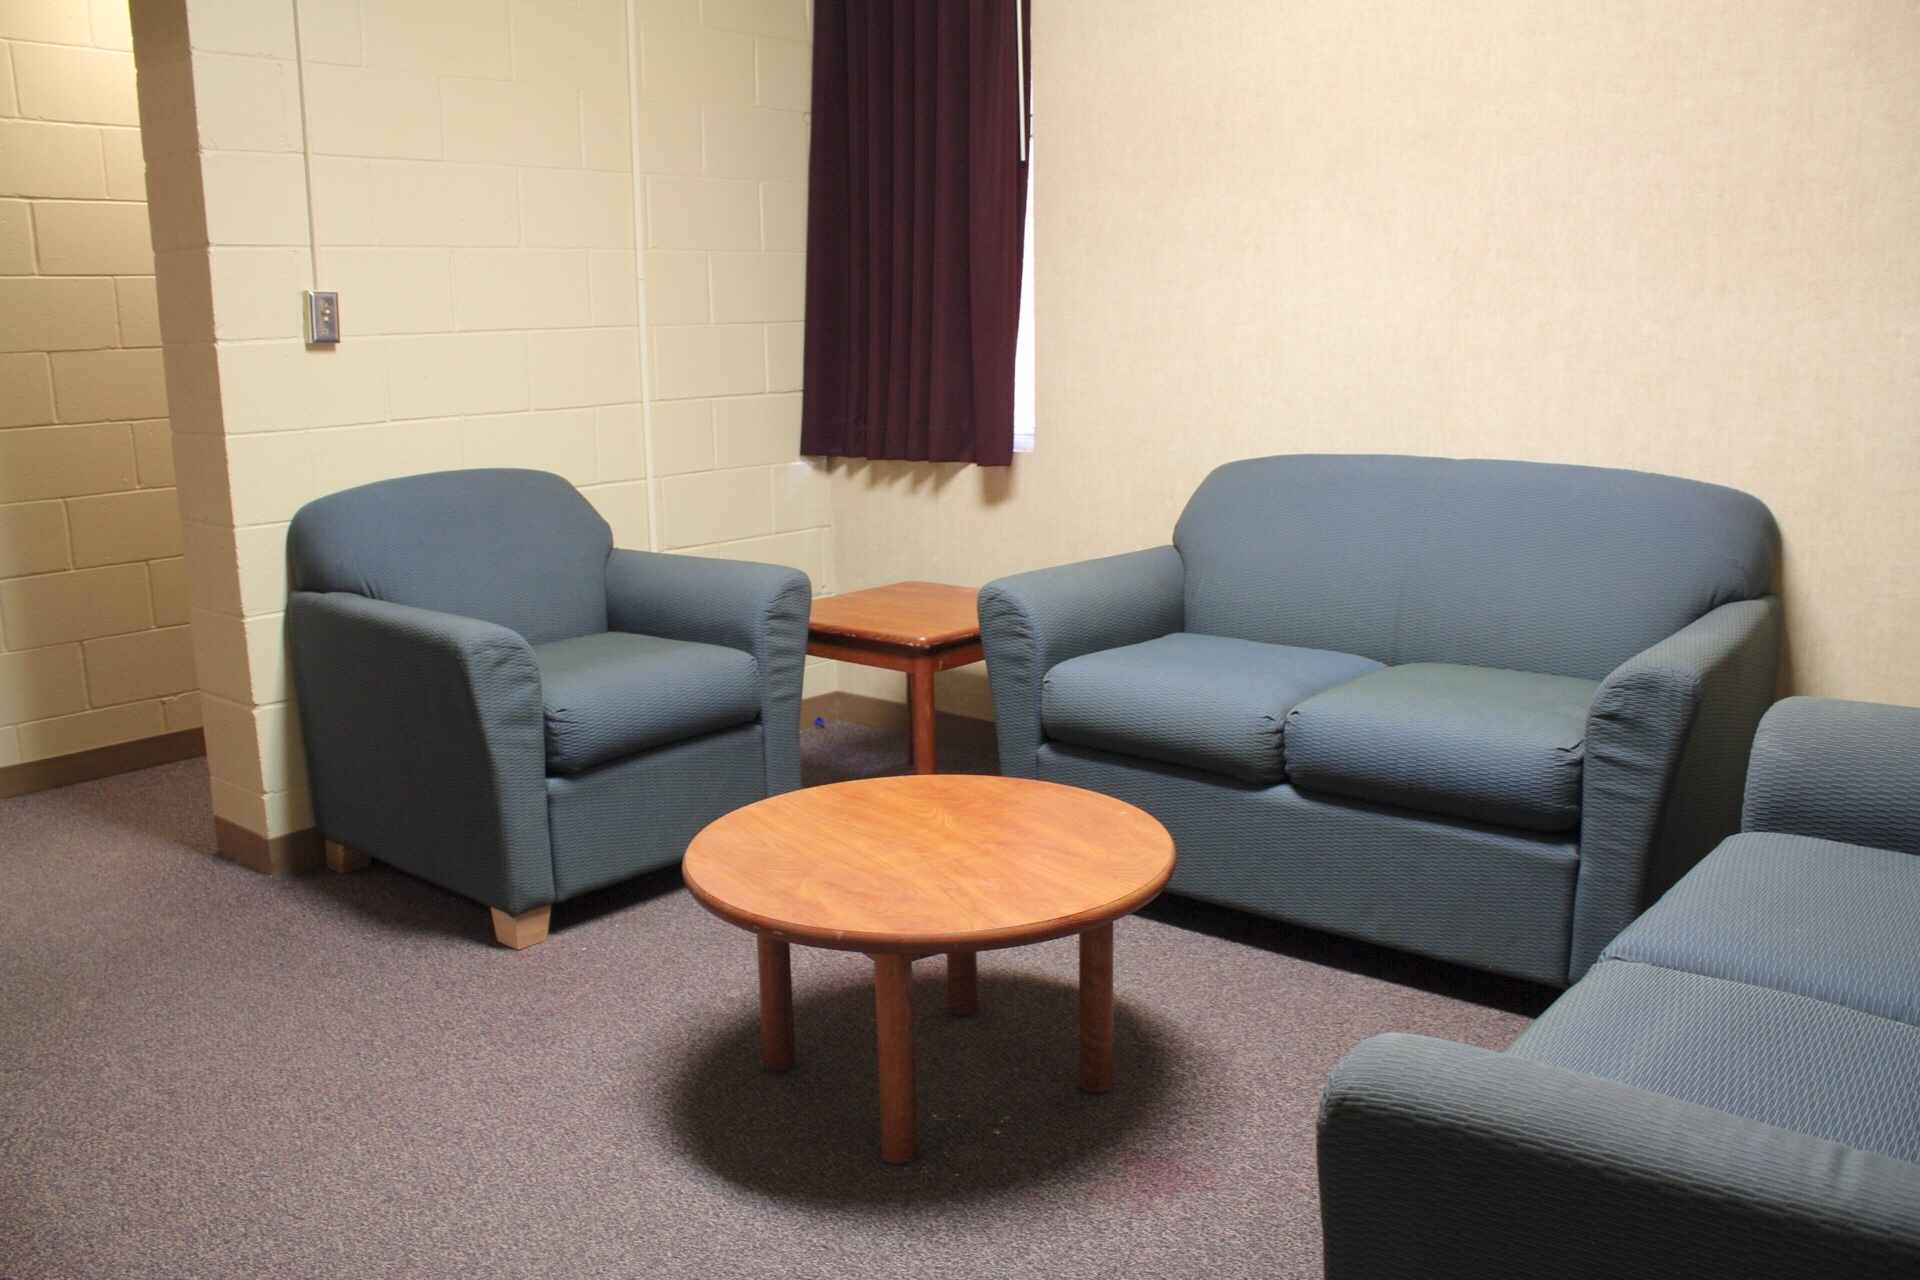 Centennial Complex suite sitting area with 2 loveseats, a chair, coffee table and end table.